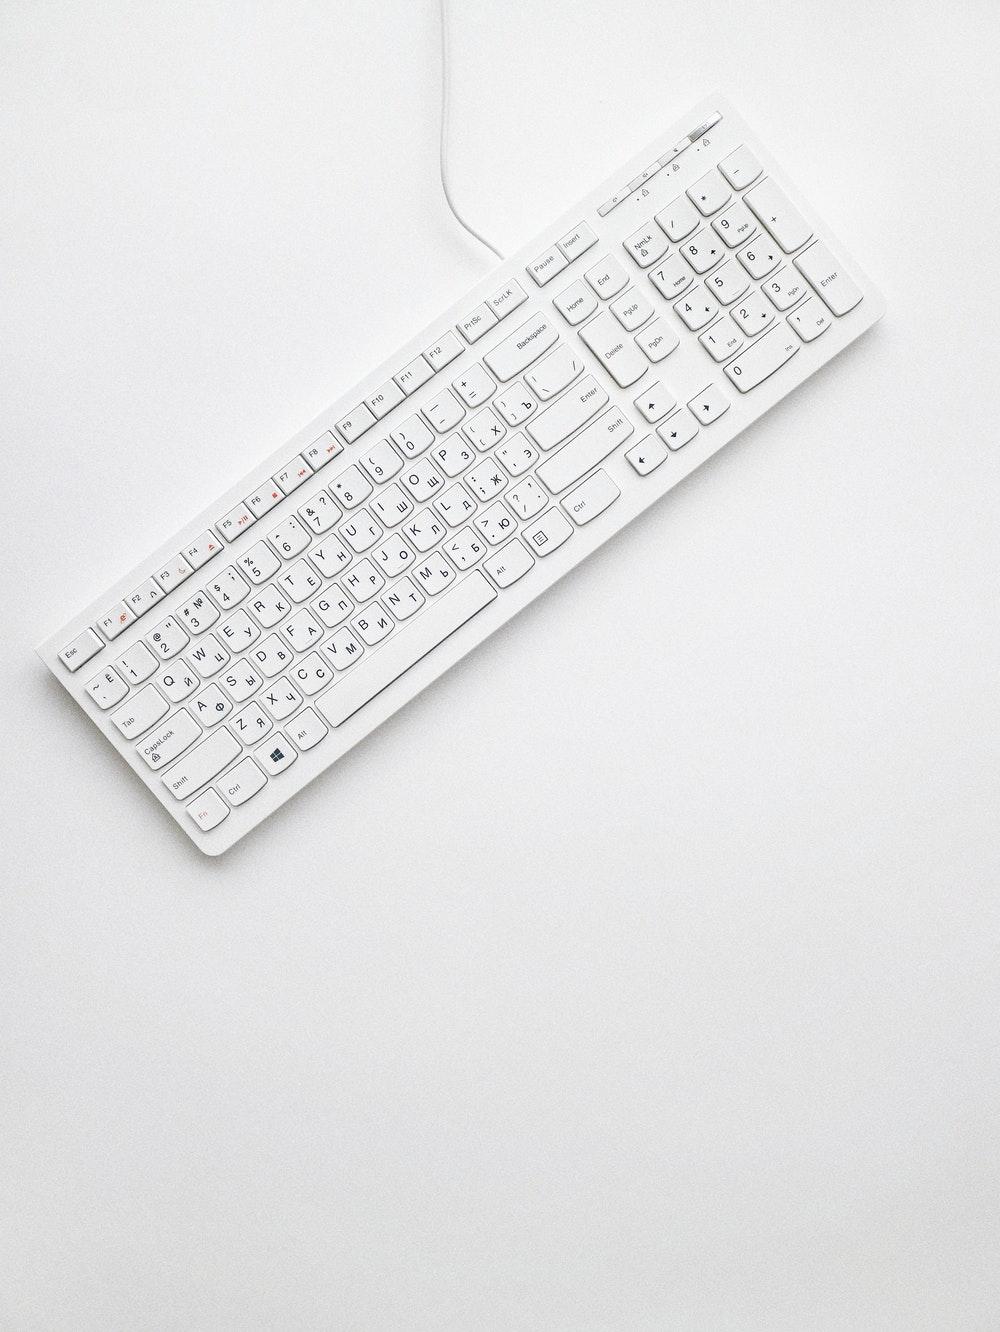 Keyboard Picture. Download Free Image